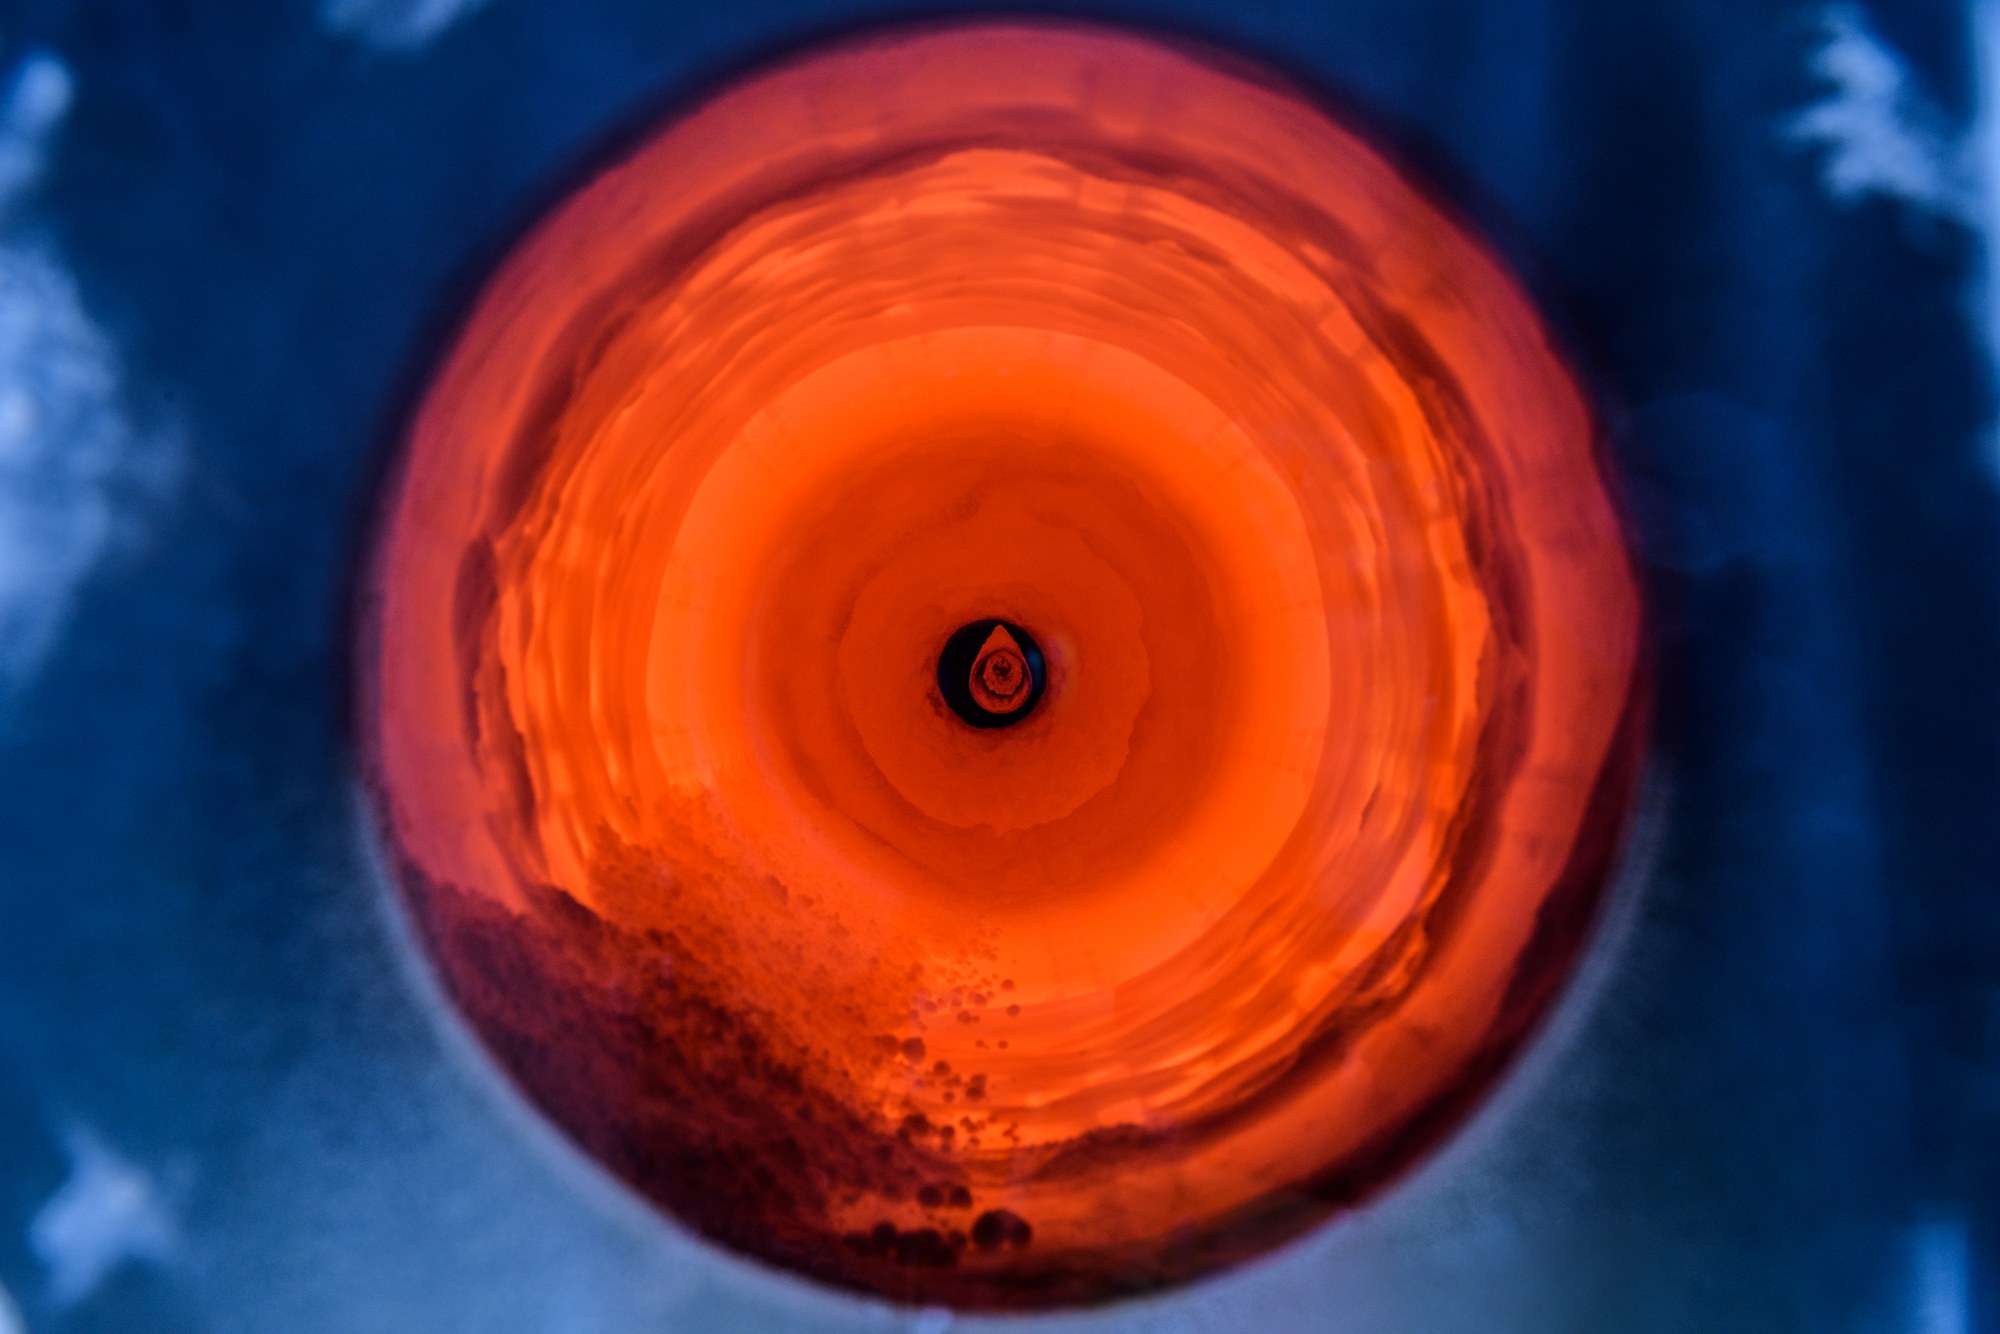 A look into the rotary drum furnace reveals a strong afterglow after irradiation.